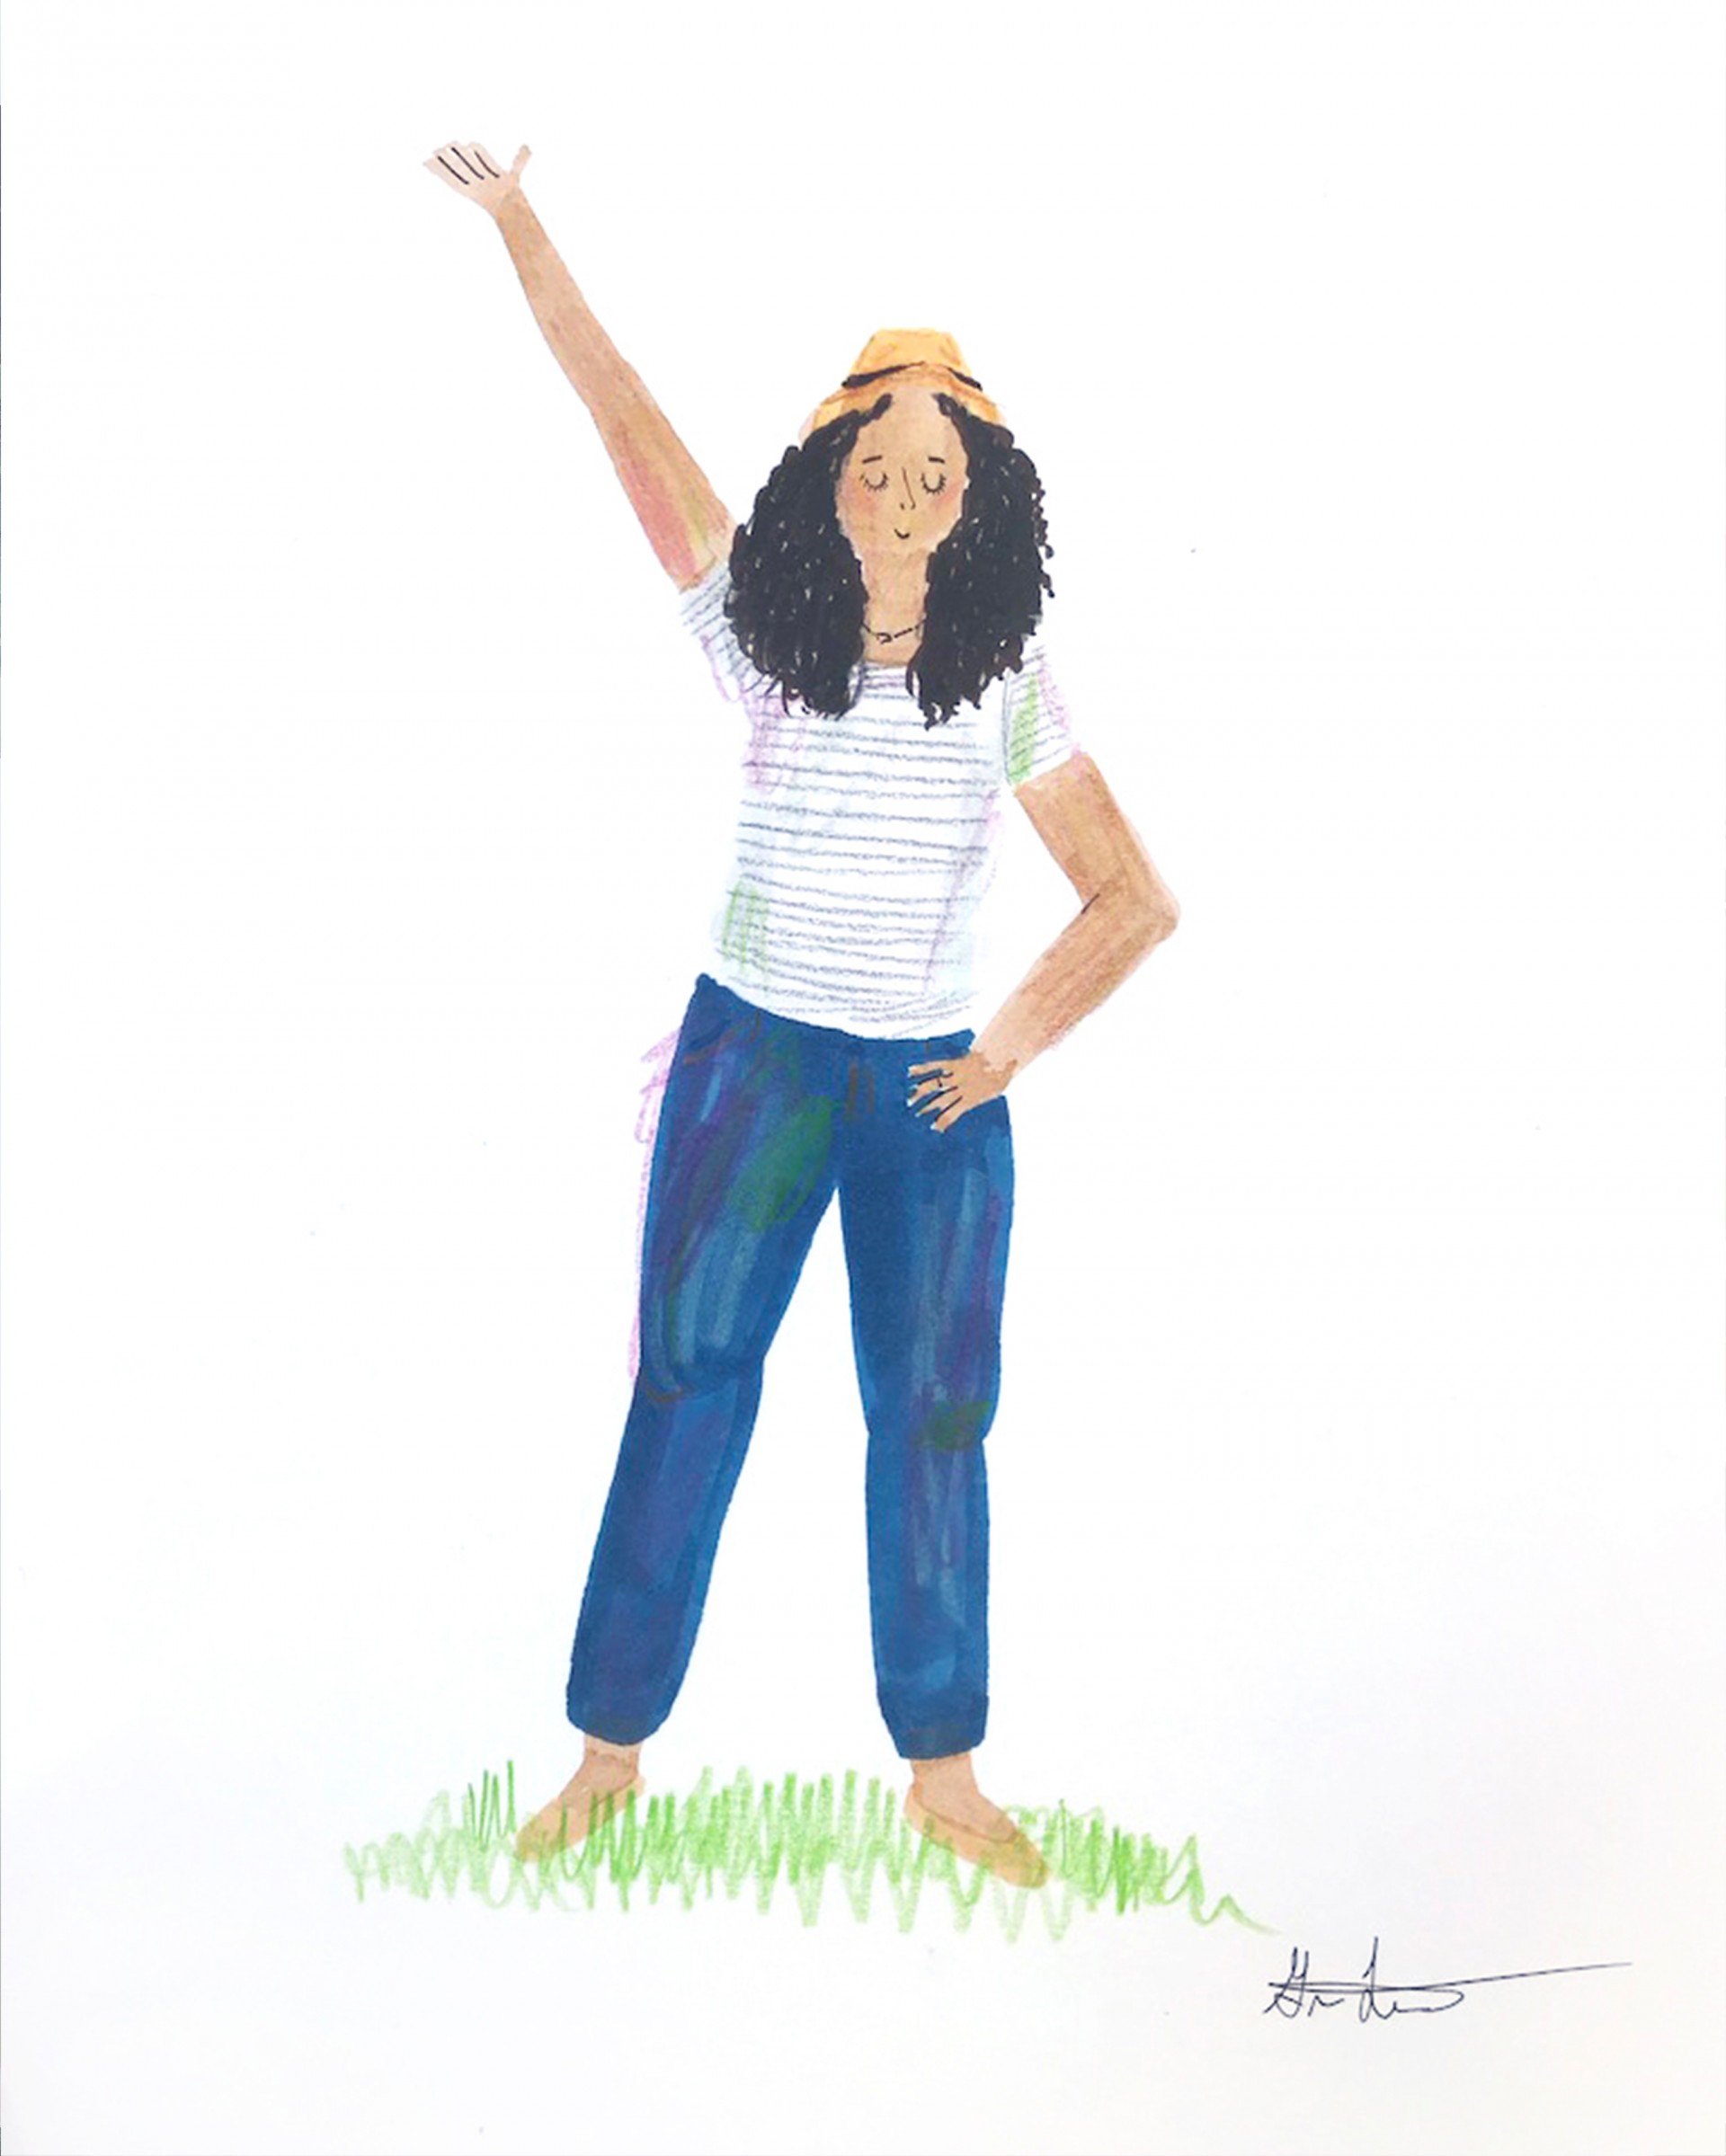 Full body drawing of girl with dark jeans, striped shirt and straw hat. One hand is above head and the other is on her waist. 